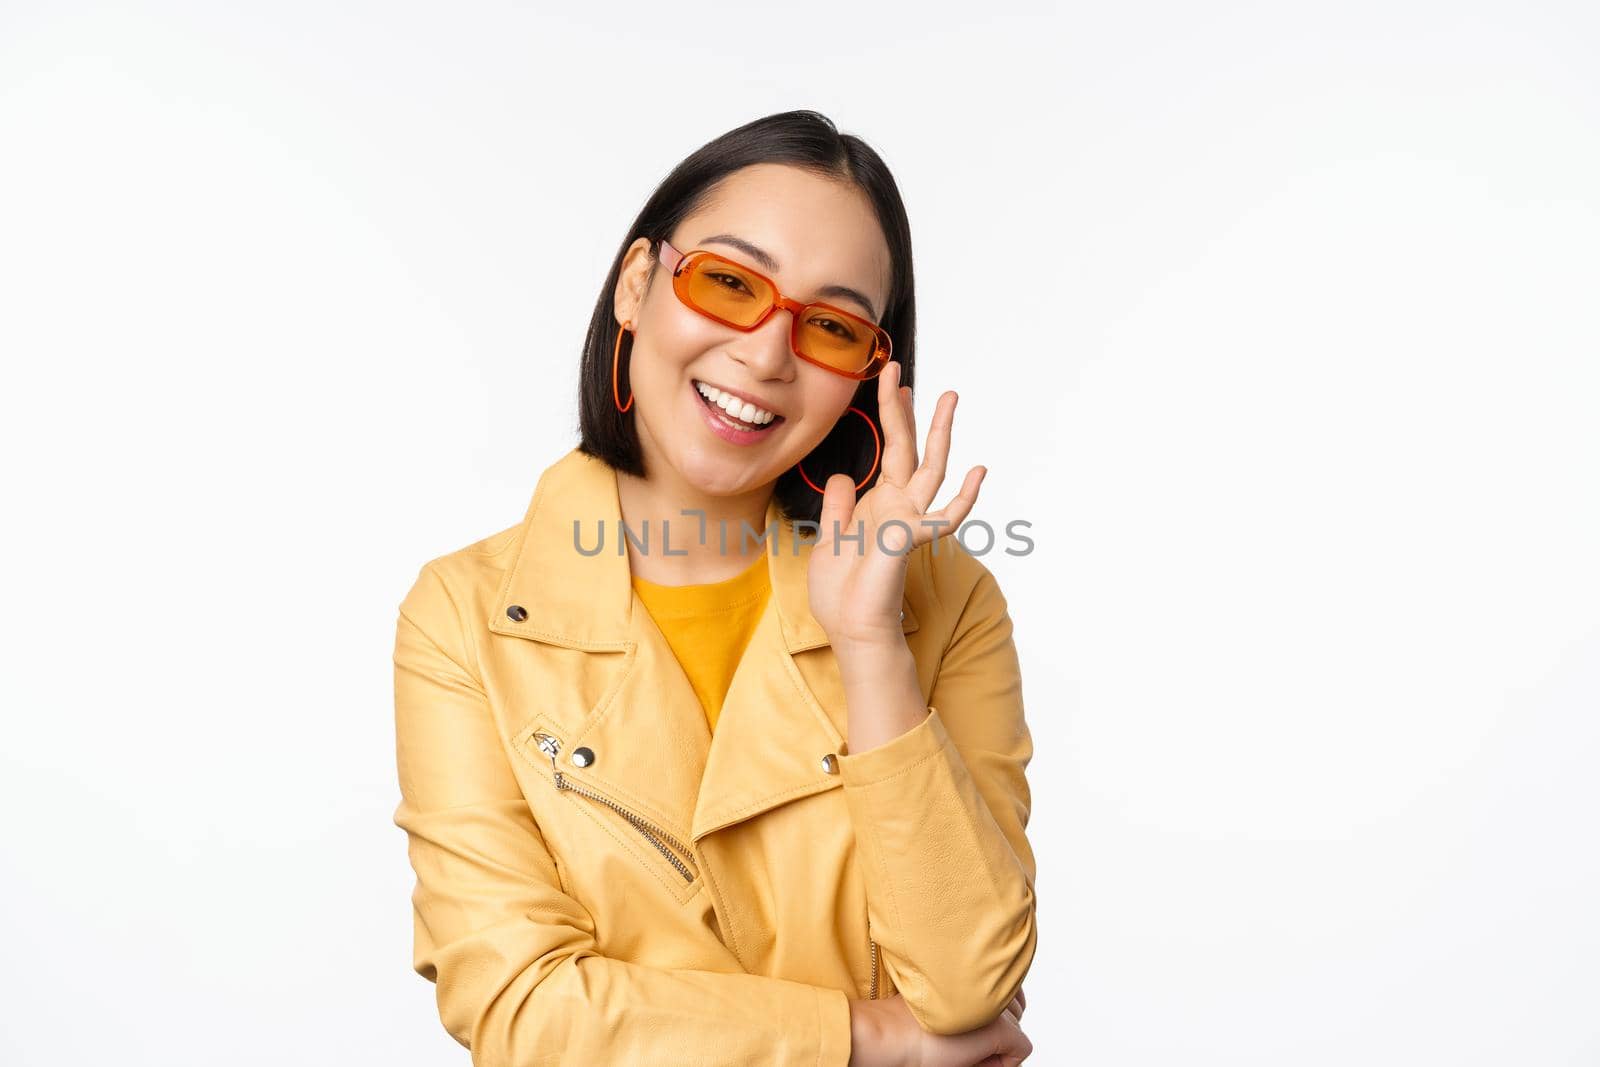 Stylish asian girl in sunglasses, smiling and looking cool, standing over white background.